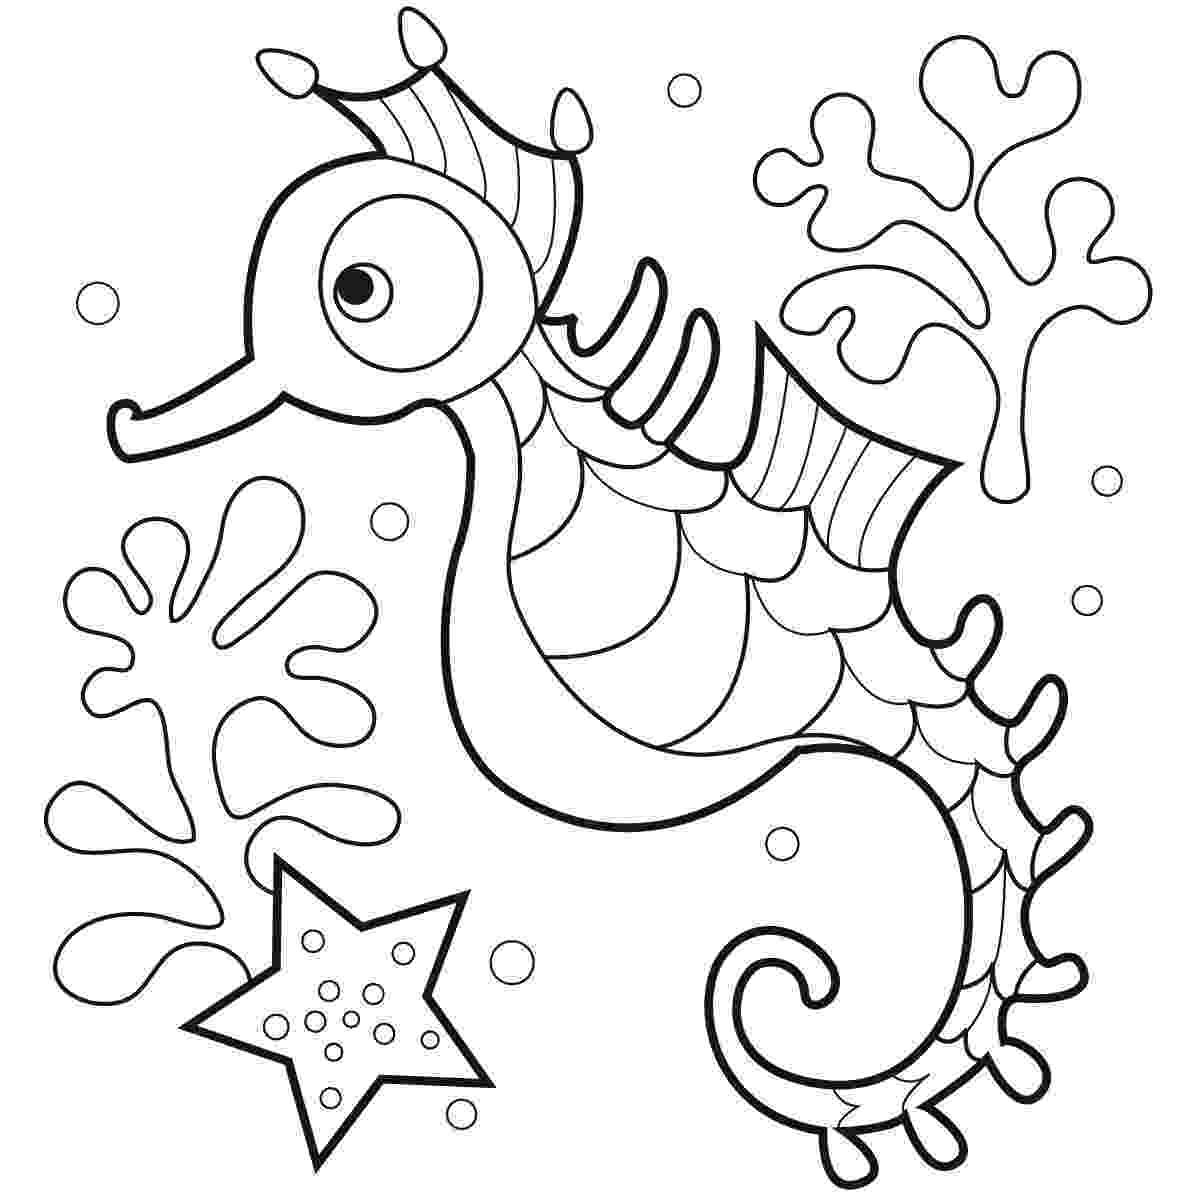 seahorses coloring pages printable seahorse coloring pages for kids cool2bkids seahorses coloring pages 